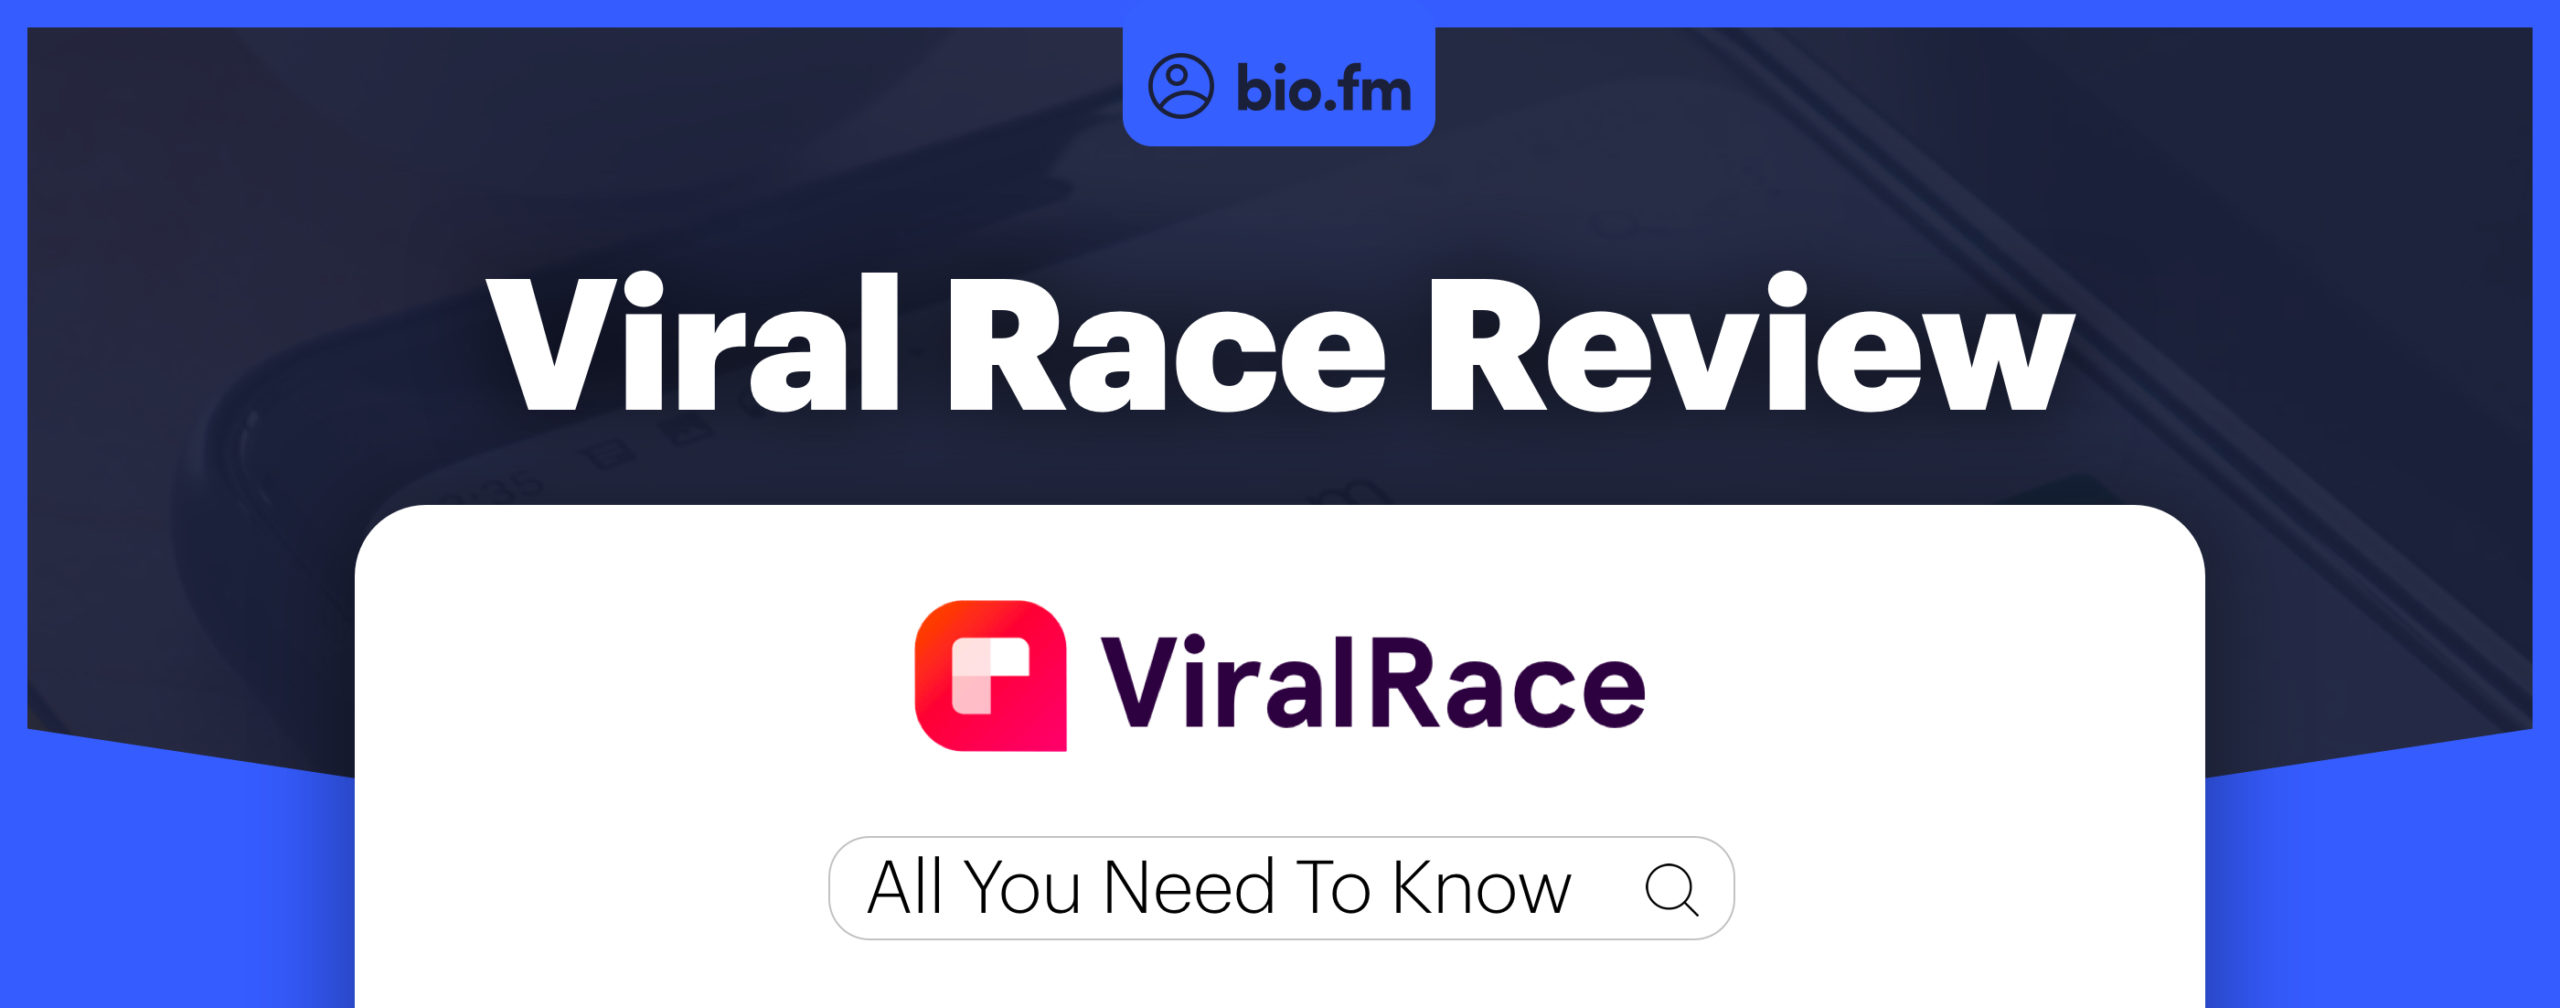 viralrace review featured image